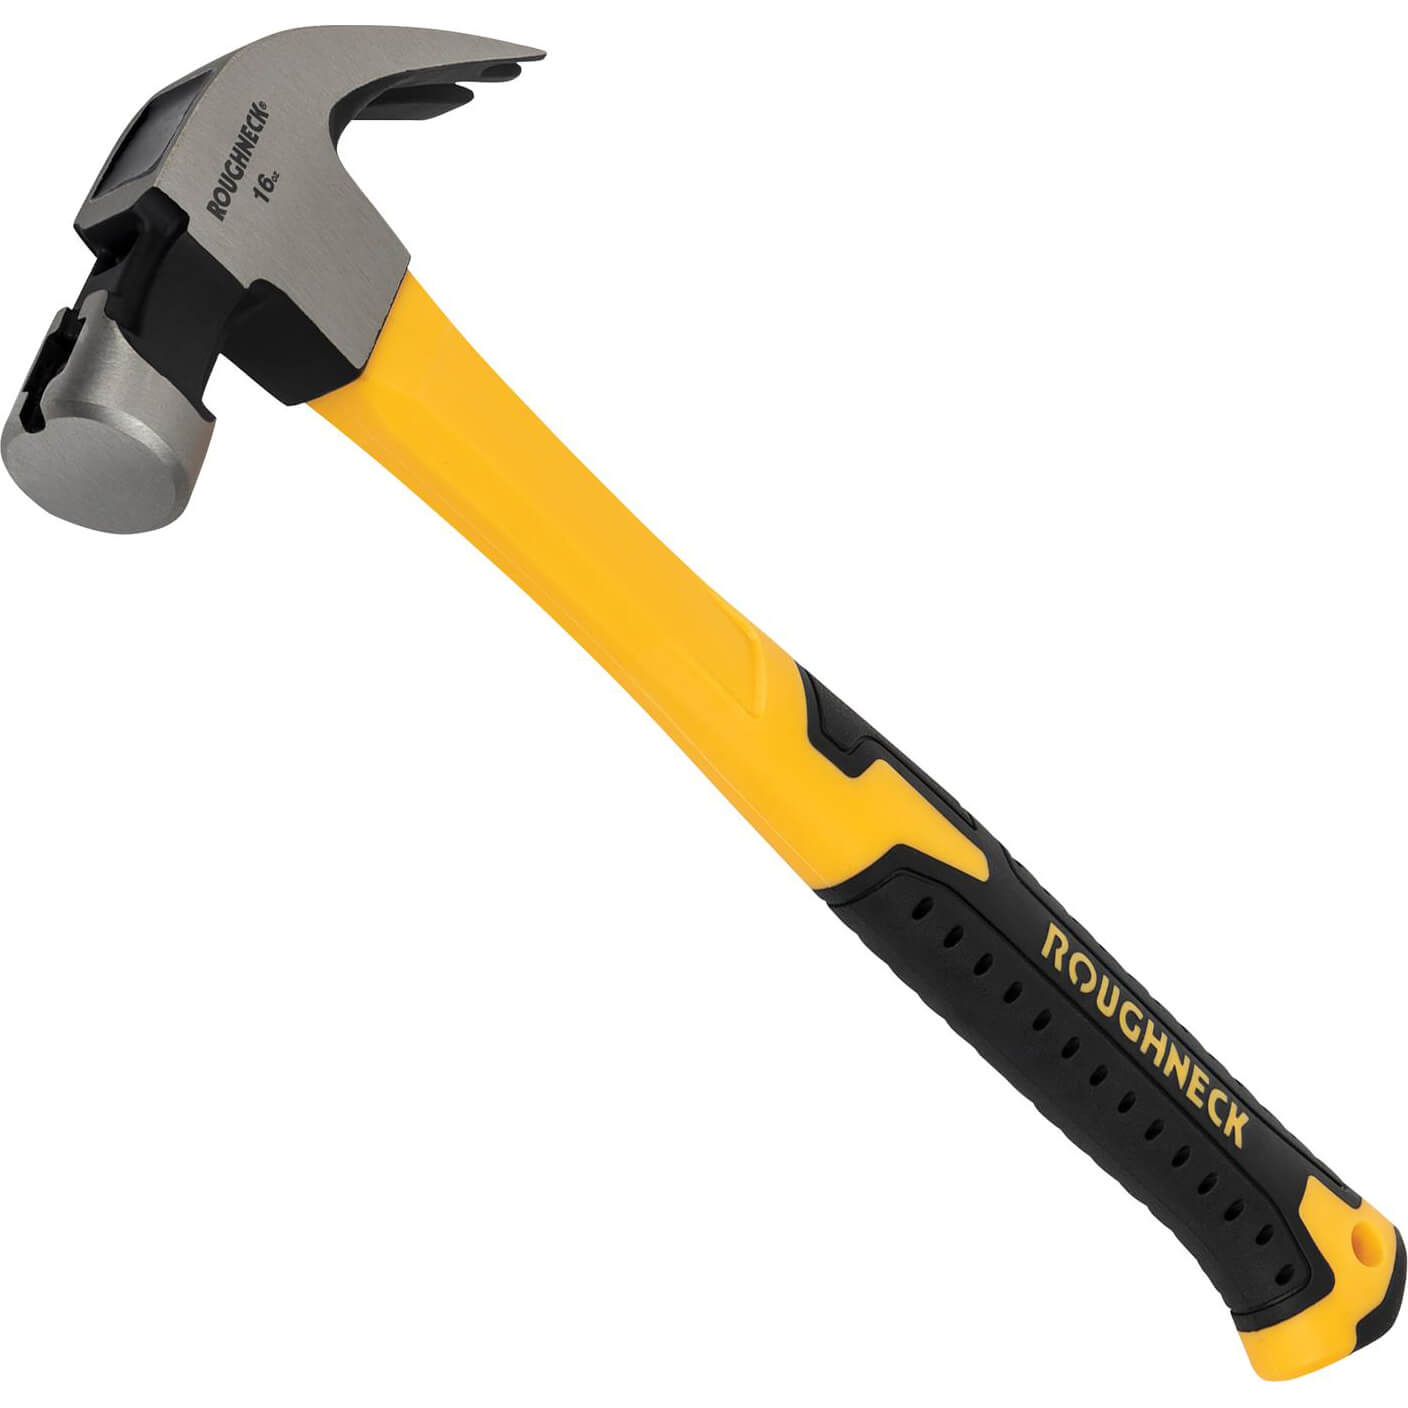 Image of Roughneck Fibreglass Shaft Curved Claw Hammer 450g